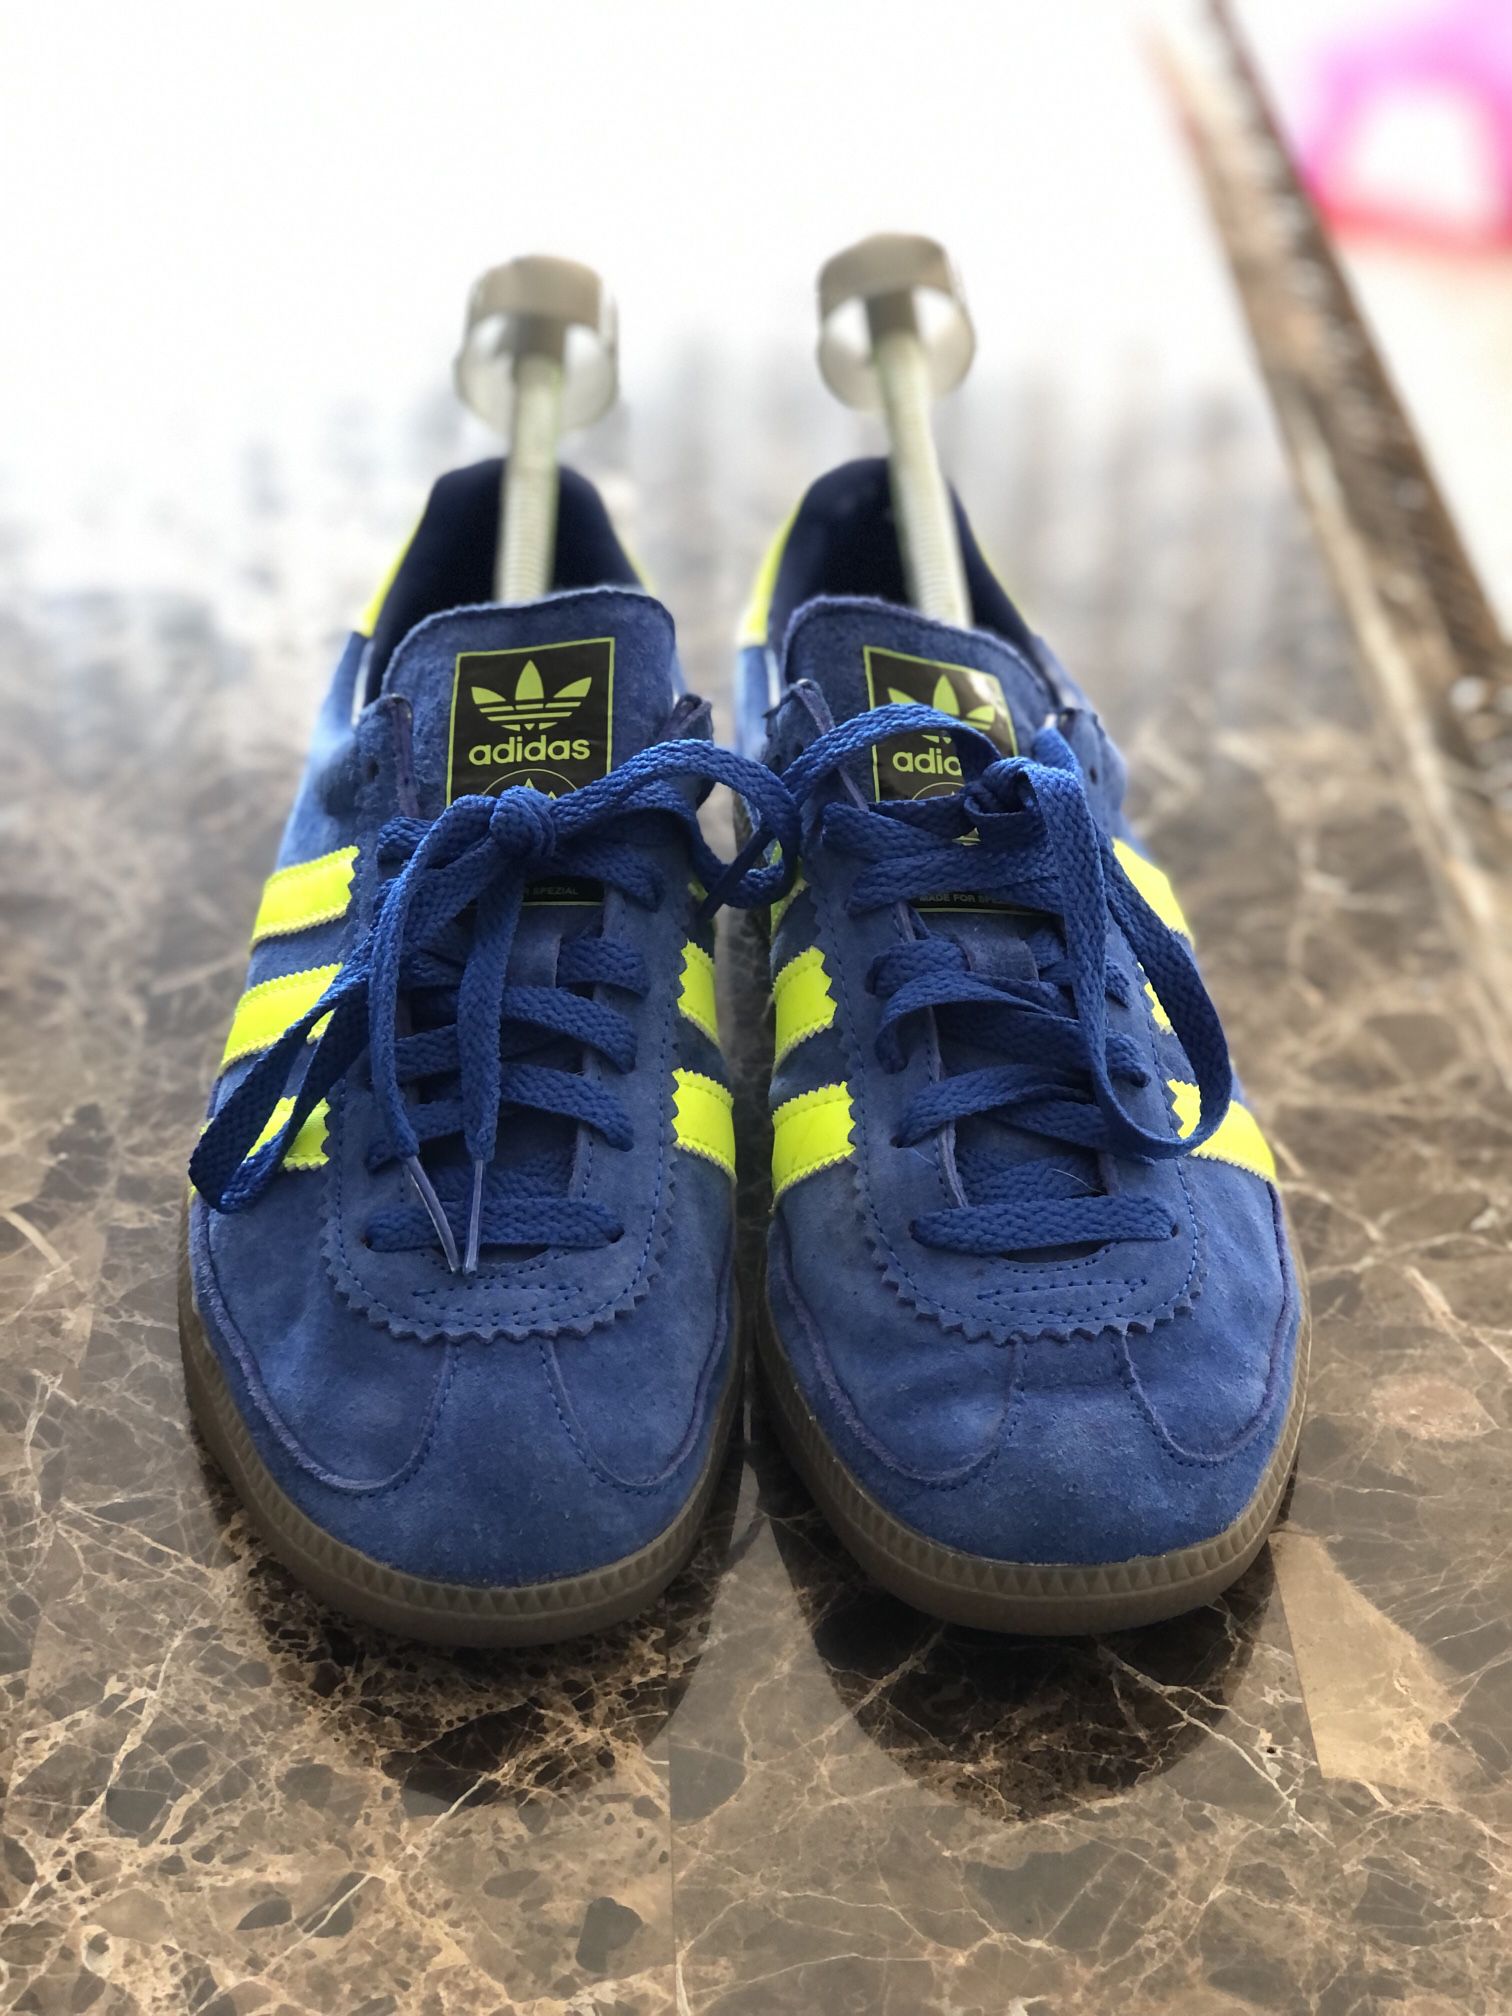 Adidas Spezial Whalley Blue 2019 Size 7.5 for Sale in Spanish Flat, - OfferUp